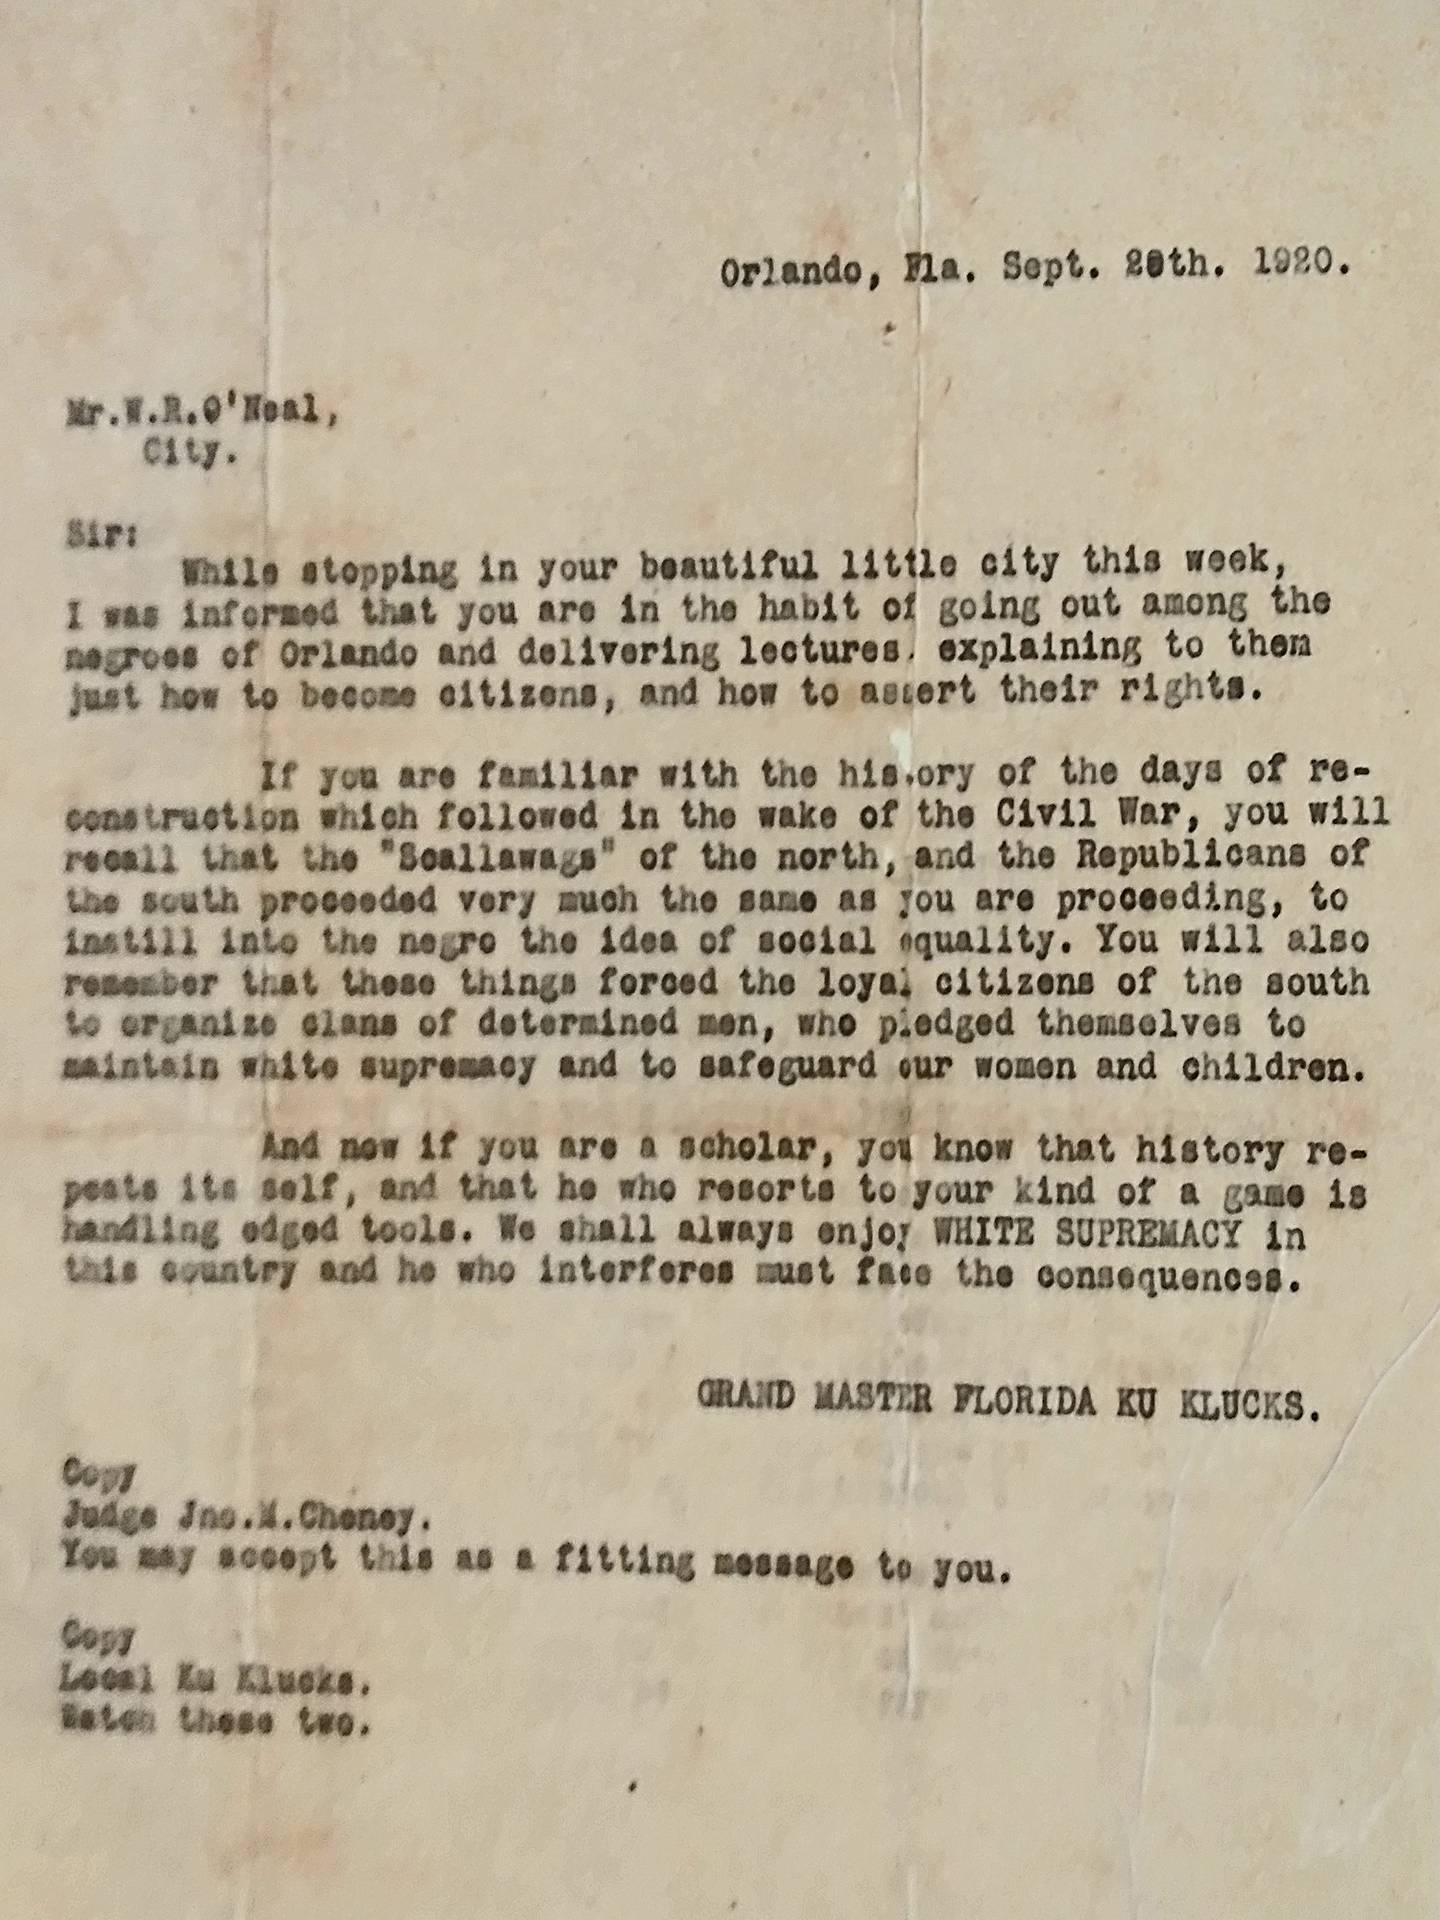 This letter is an example of communication shared amongst members of the Florida Ku Klux Klan in the early 20th century.